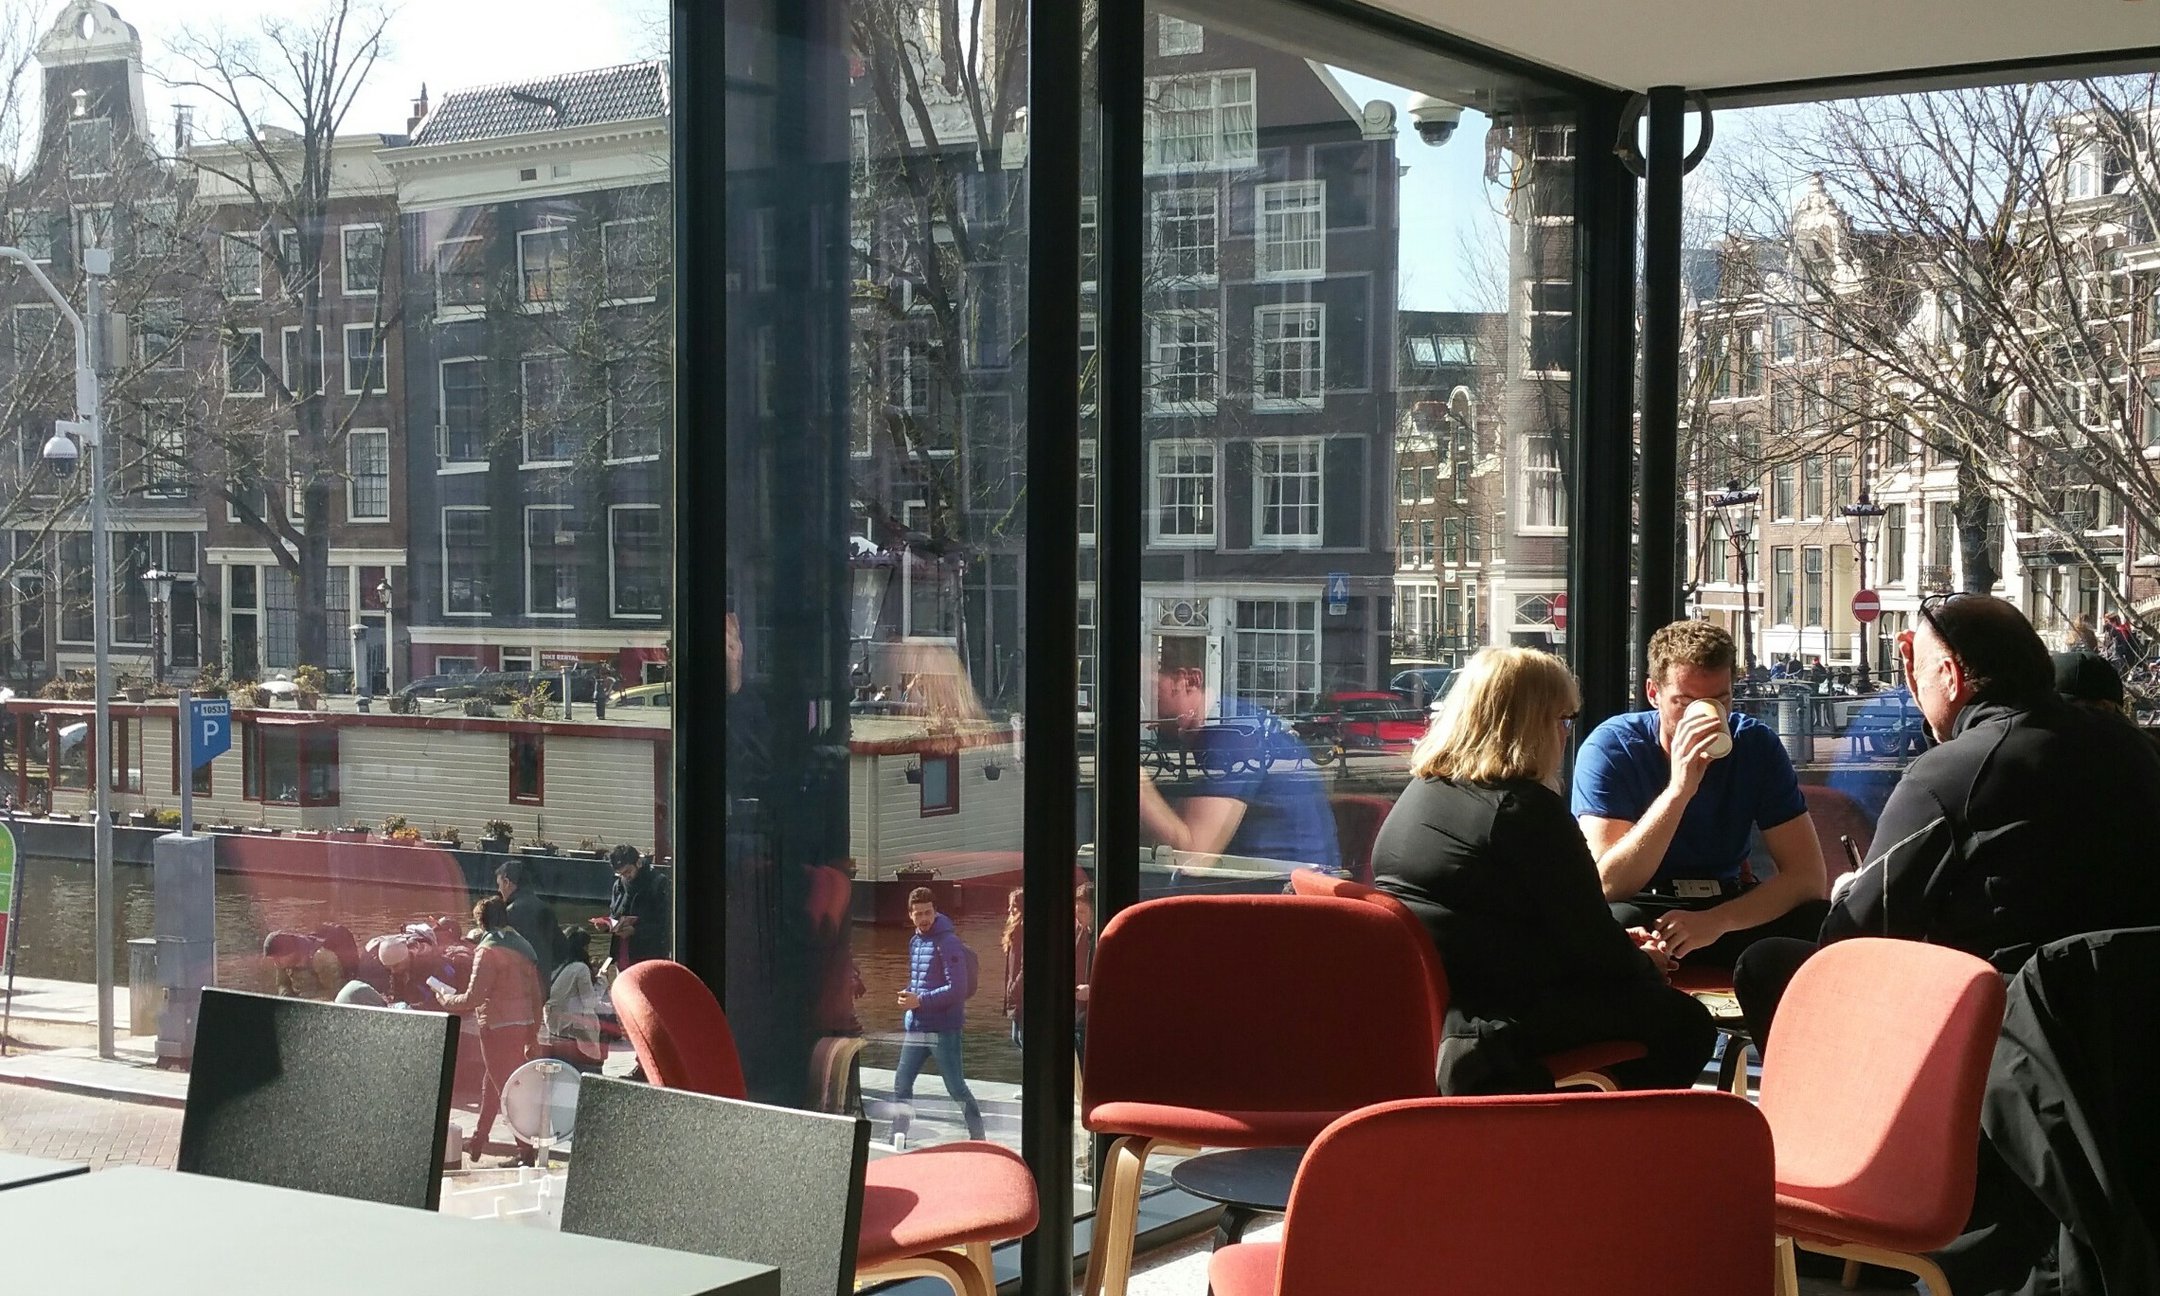 The museum cafe at the Anne Frank House